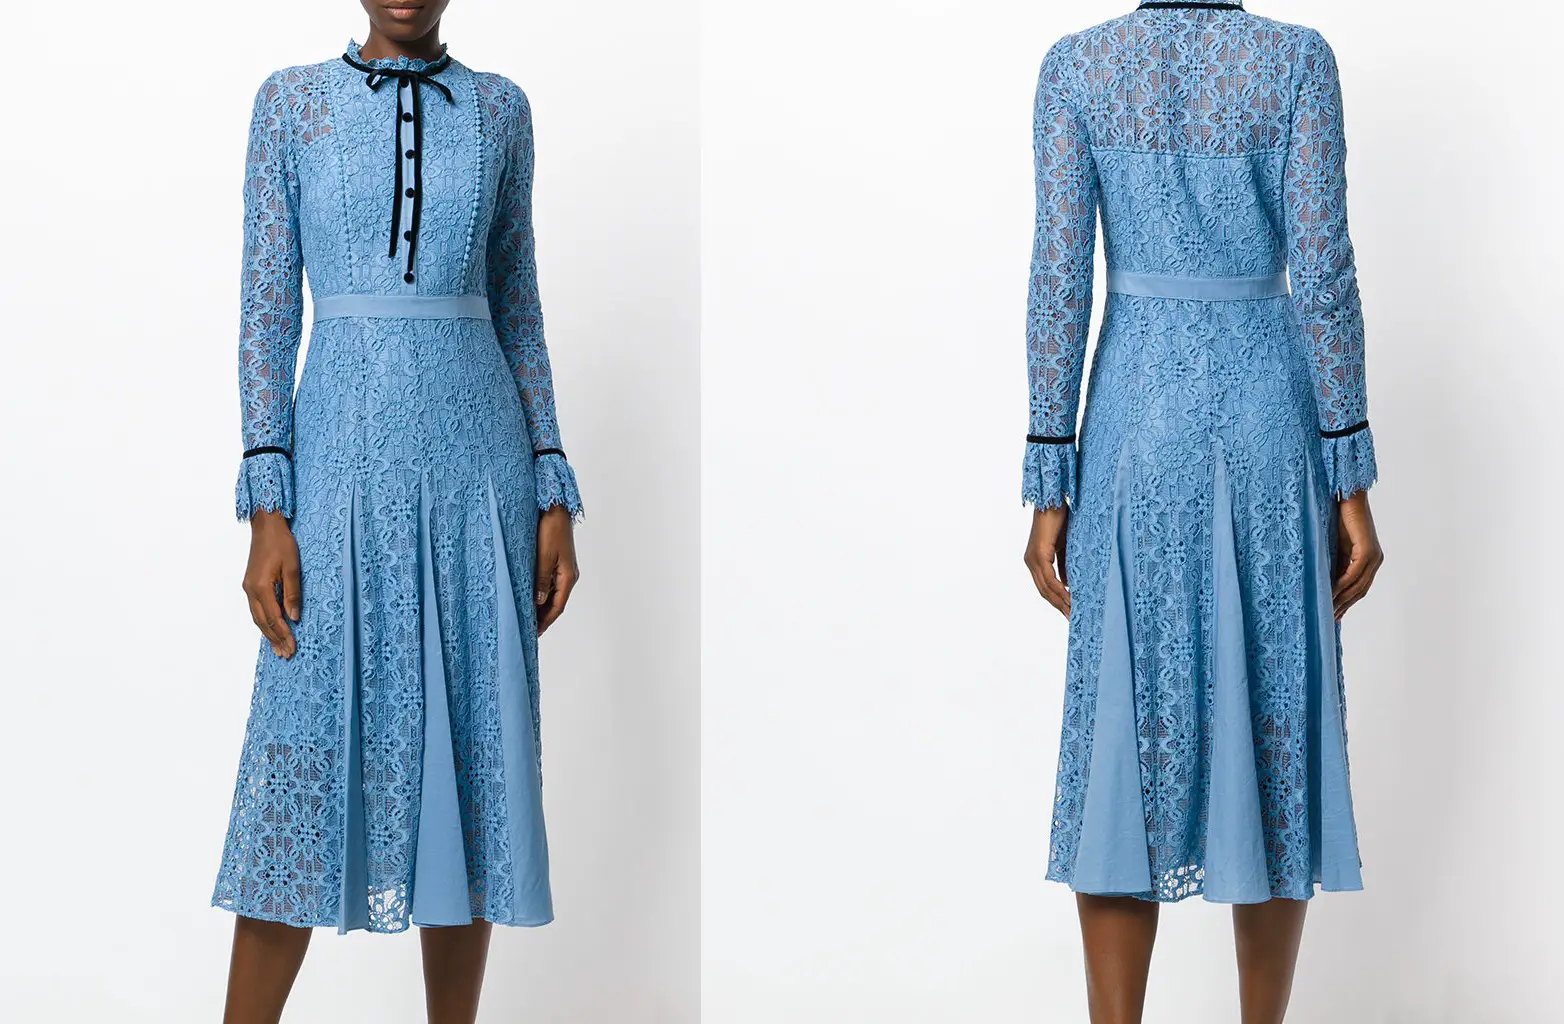 Duchess of Cambridge wore Temperley London’s ‘Eclipse’ Lace Dress on World Mental Health Day in 208